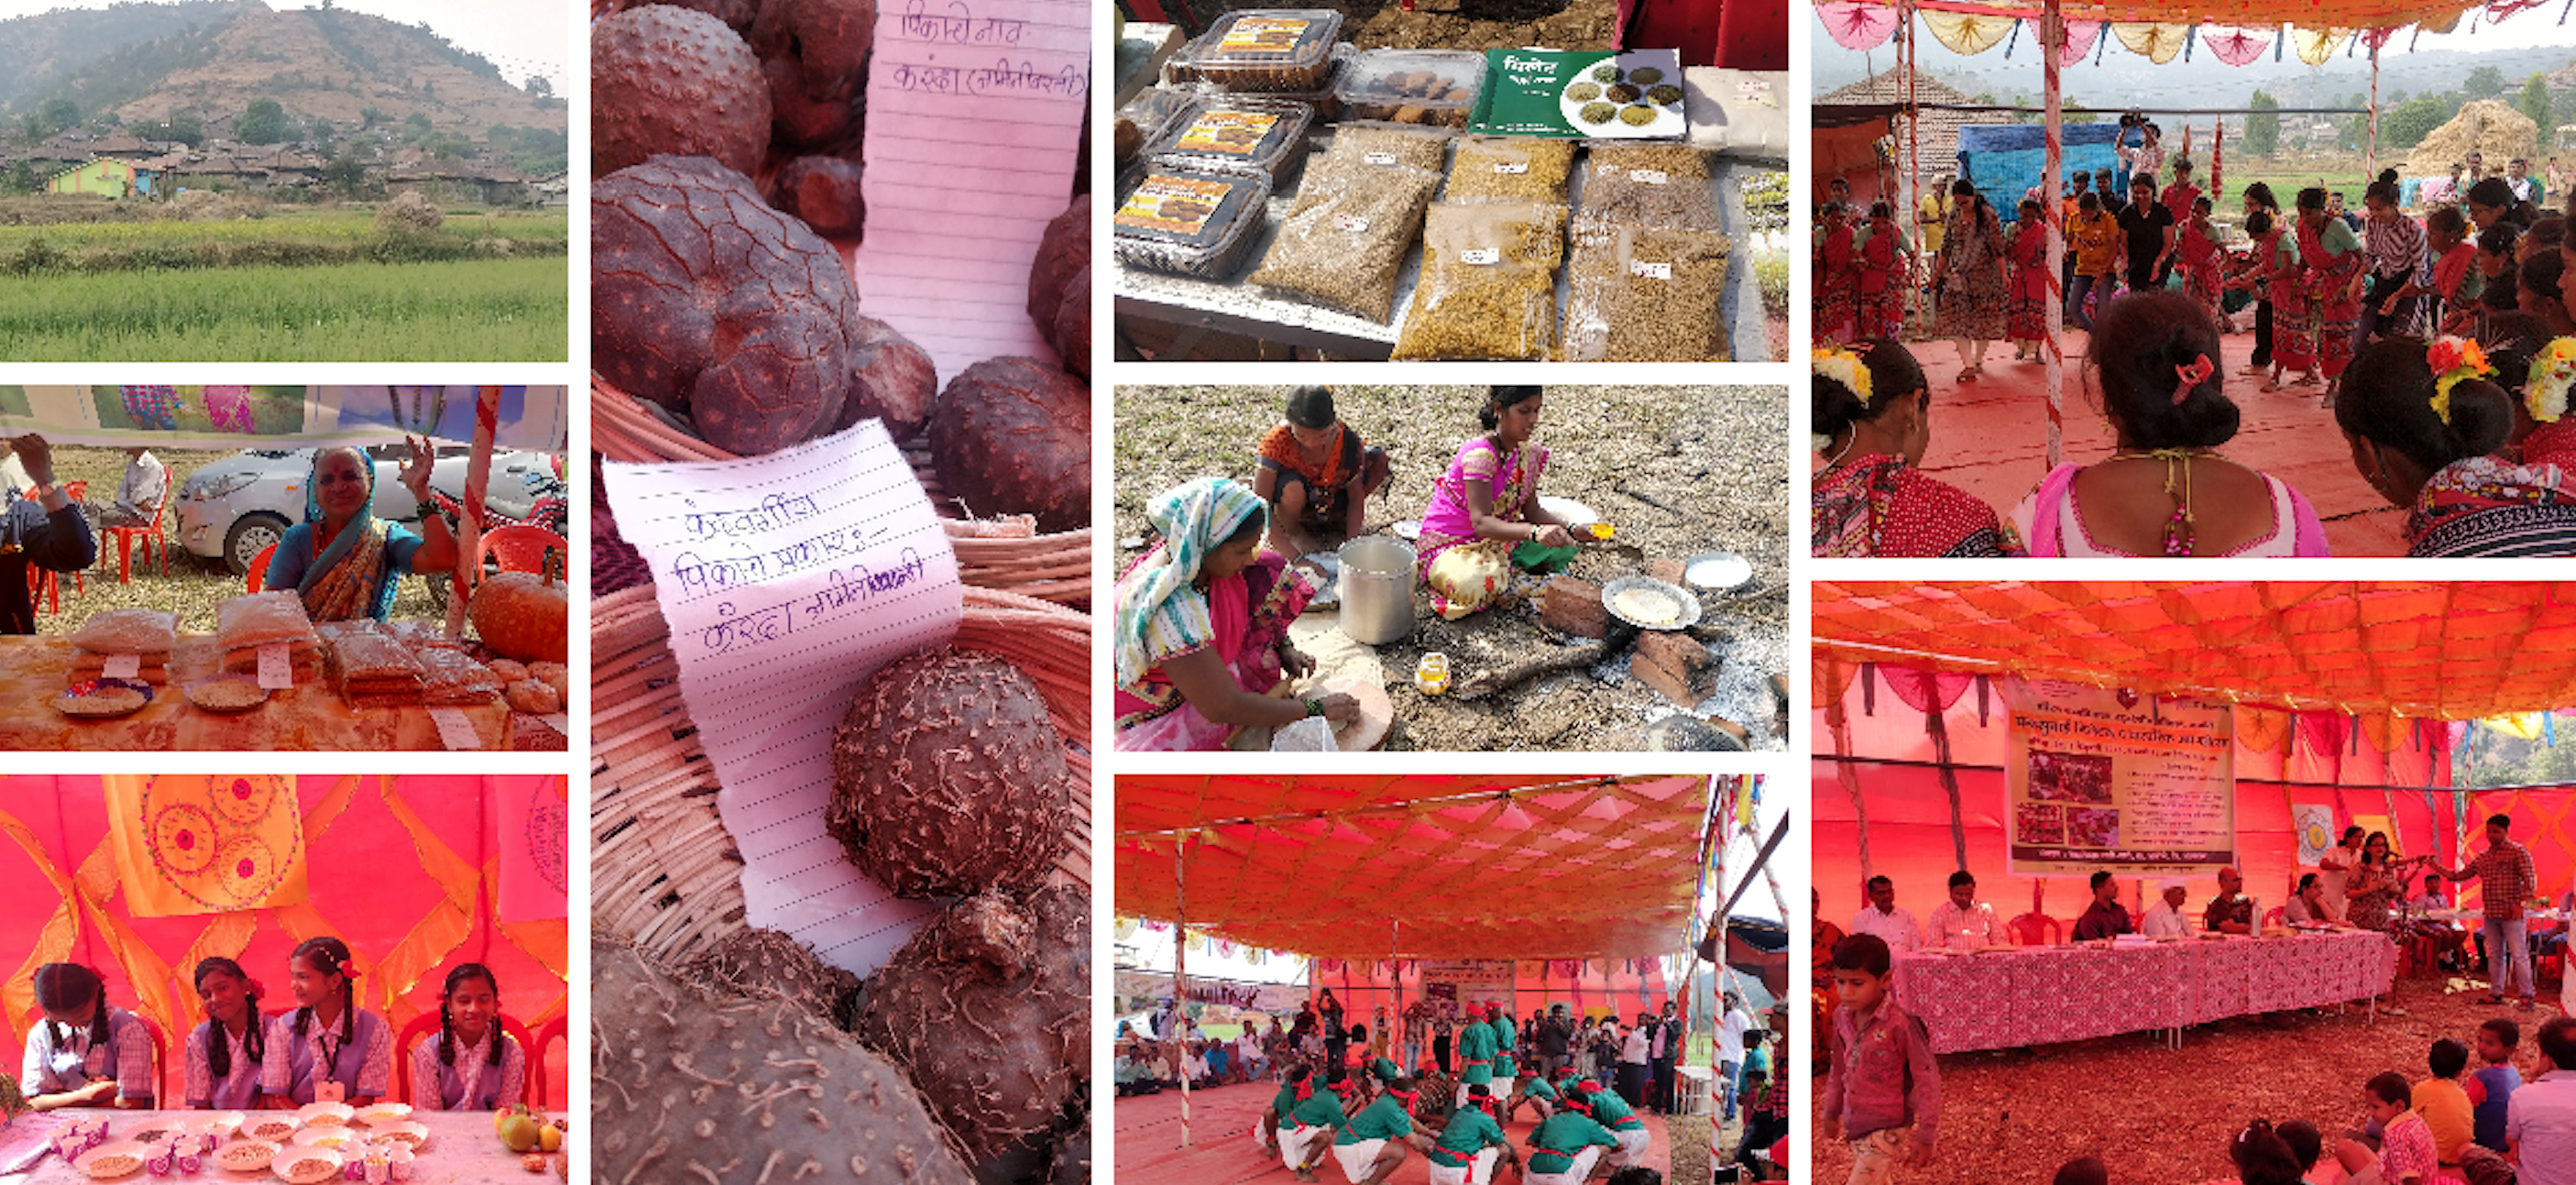 A snapshot of the staggering variety of food and cultural heritage on offer at tribal food festivals